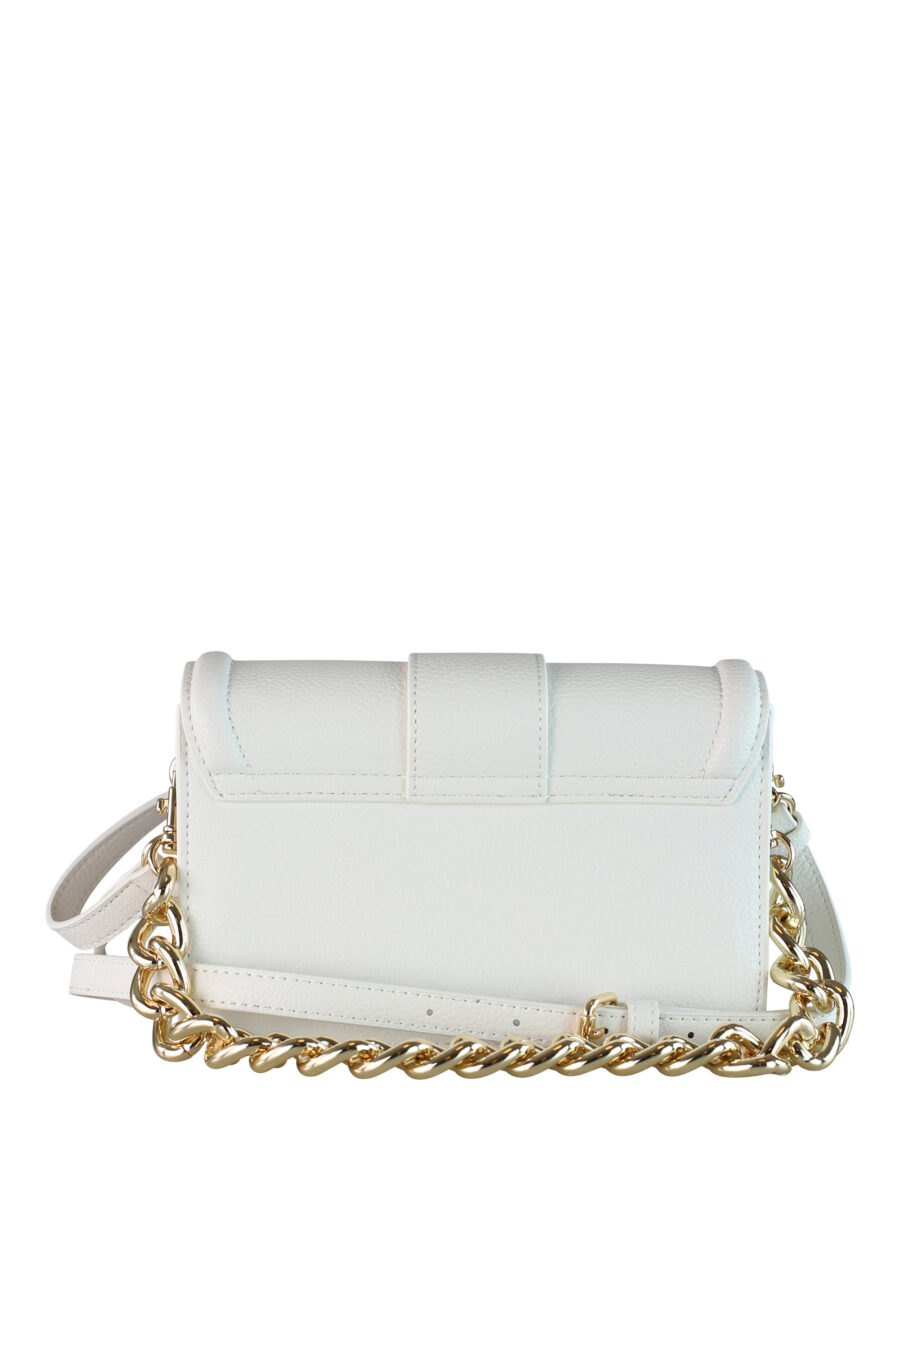 White shoulder bag with chain and baroque buckle - IMG 0449